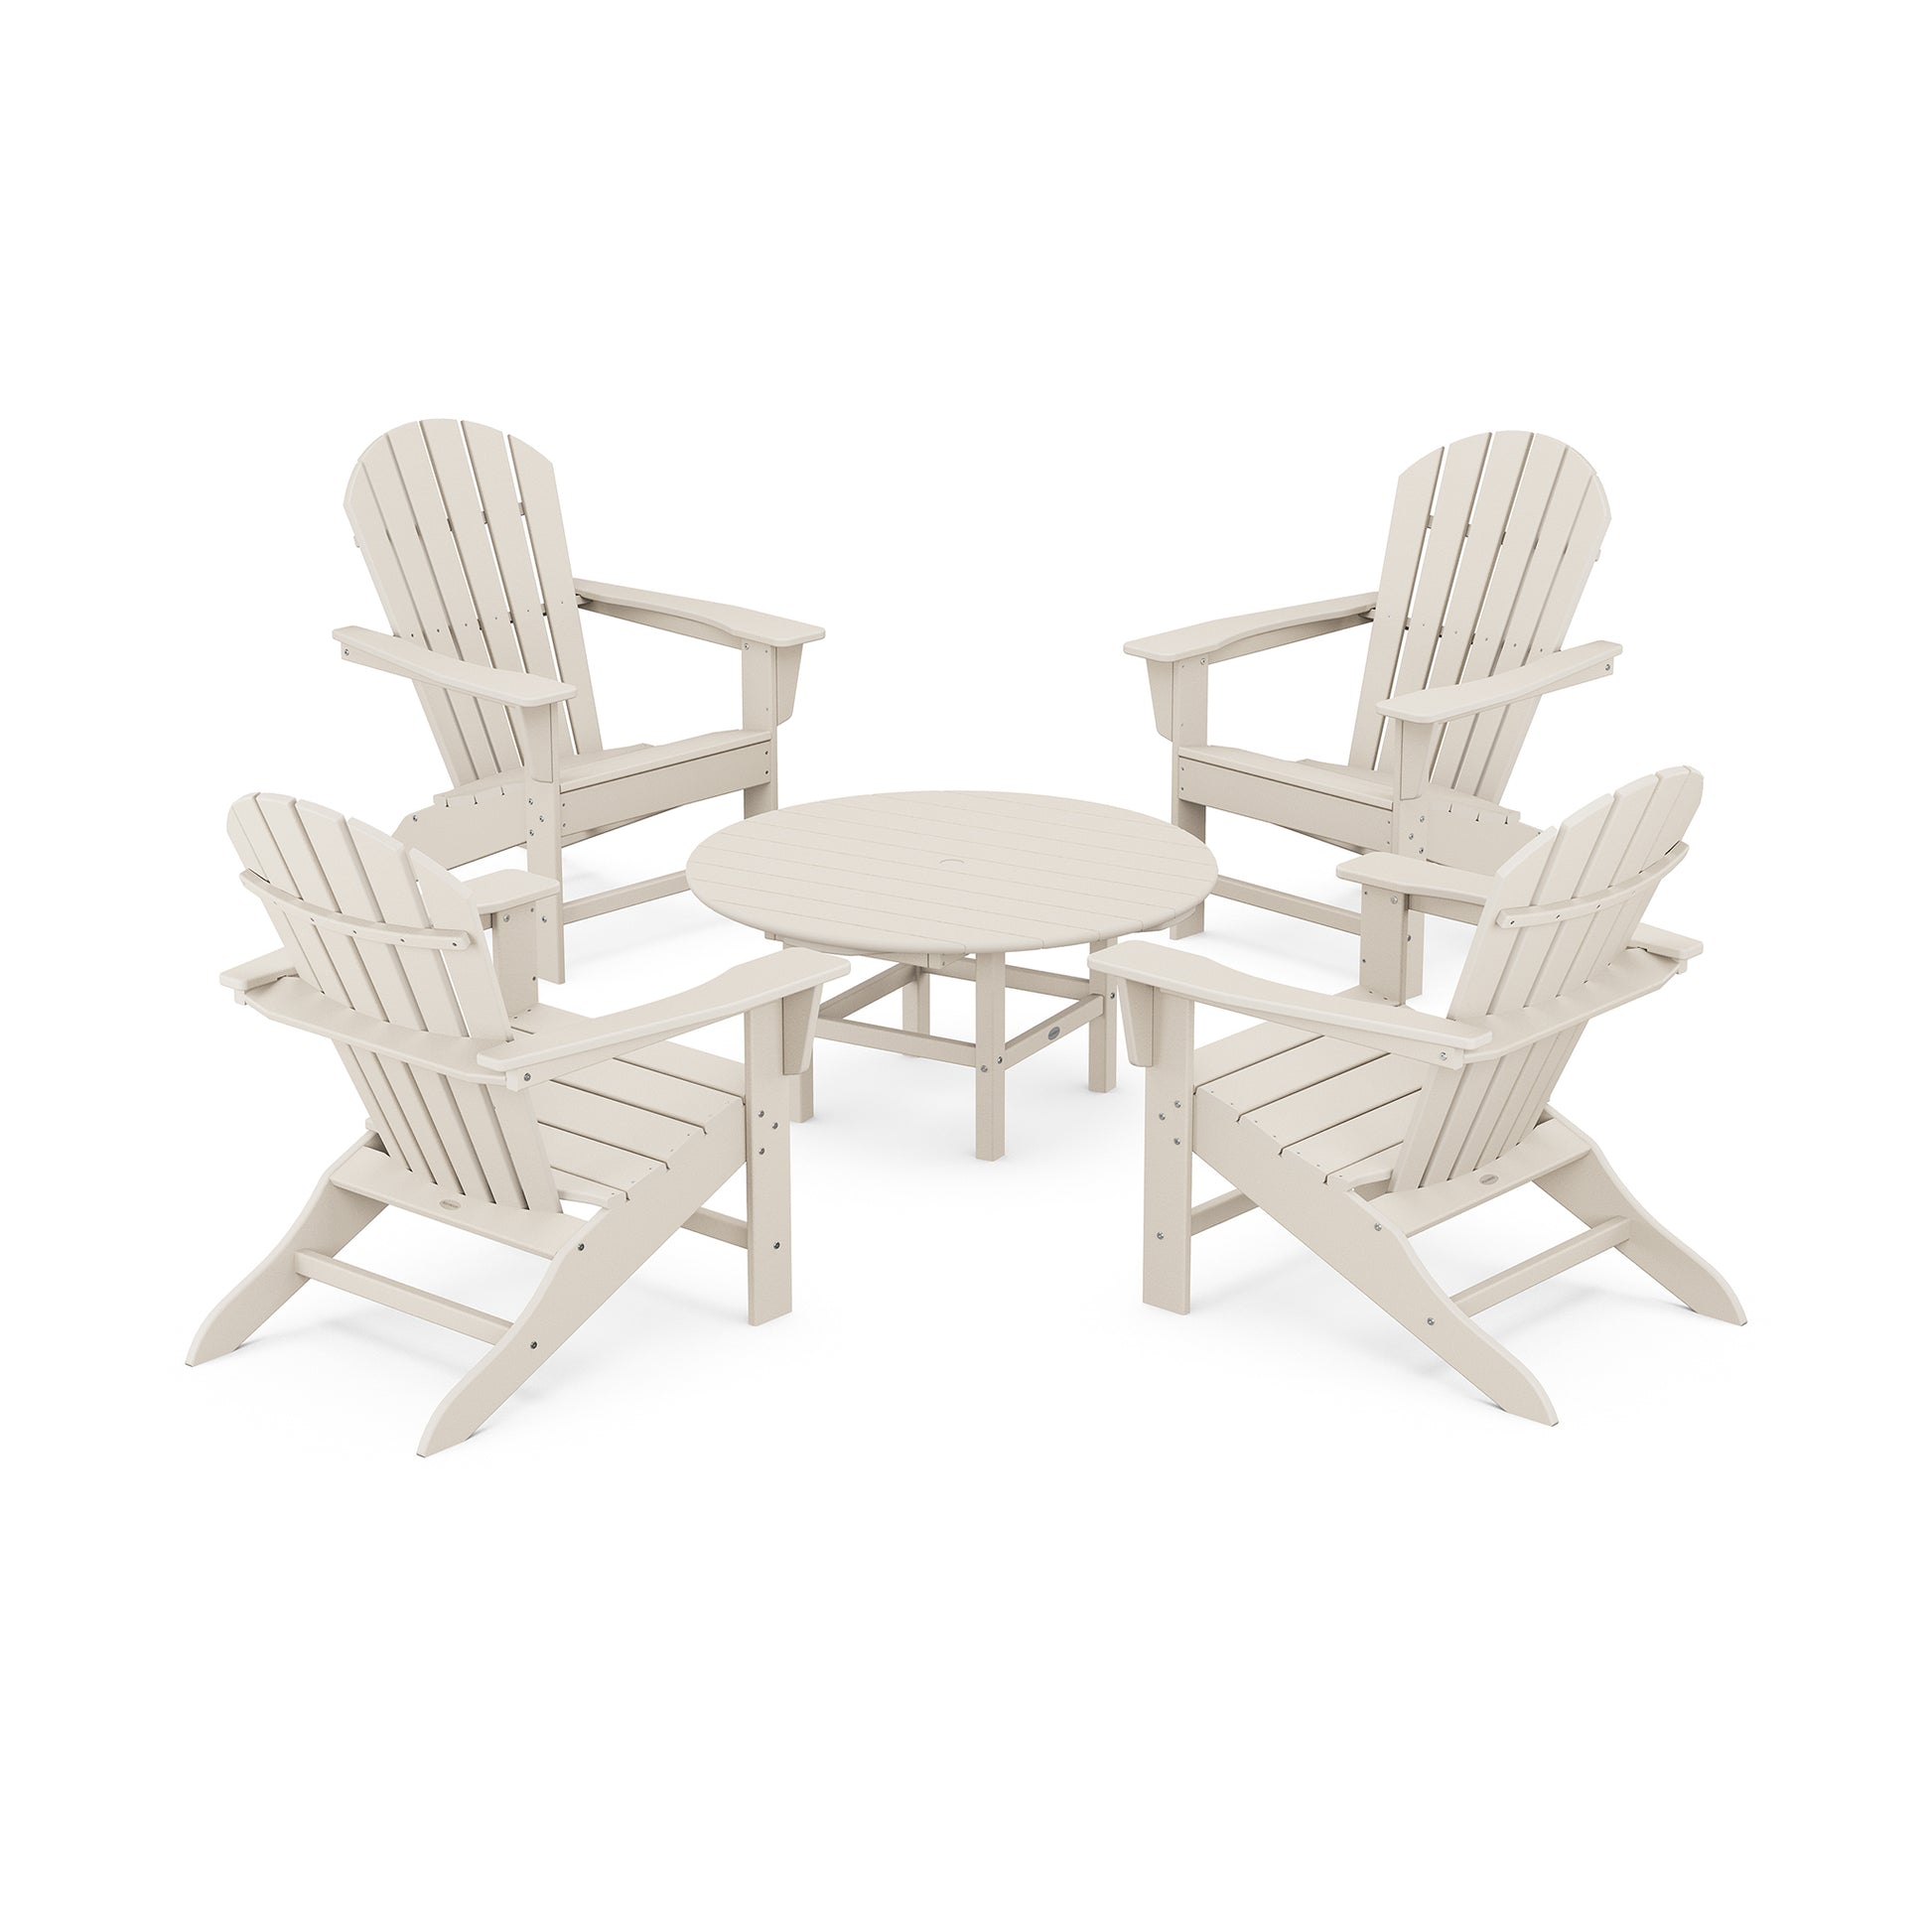 Four beige POLYWOOD South Beach Adirondack-style chairs arranged around a small, circular matching table on a plain white background.